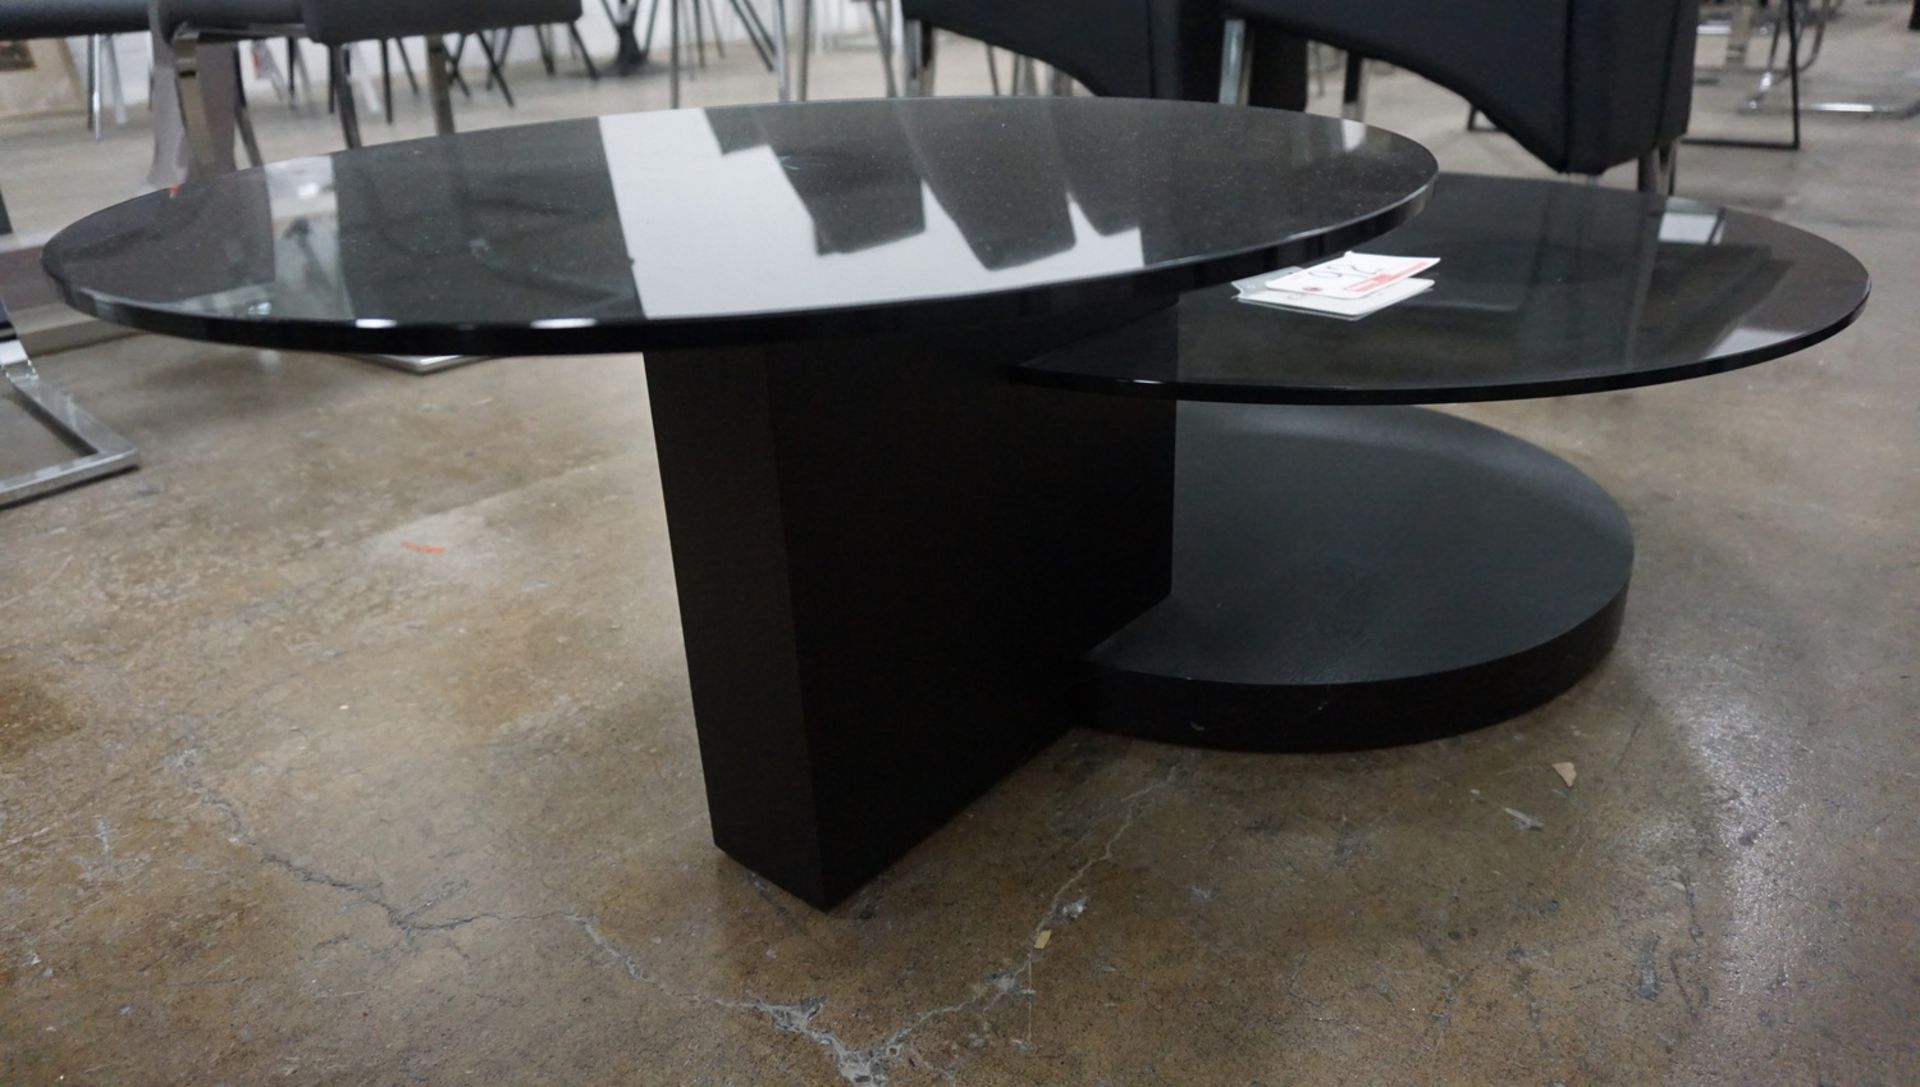 TEMPERED GLASS 31.5"D X 23.5"H ROUND COFFEE TABLE - Image 2 of 2